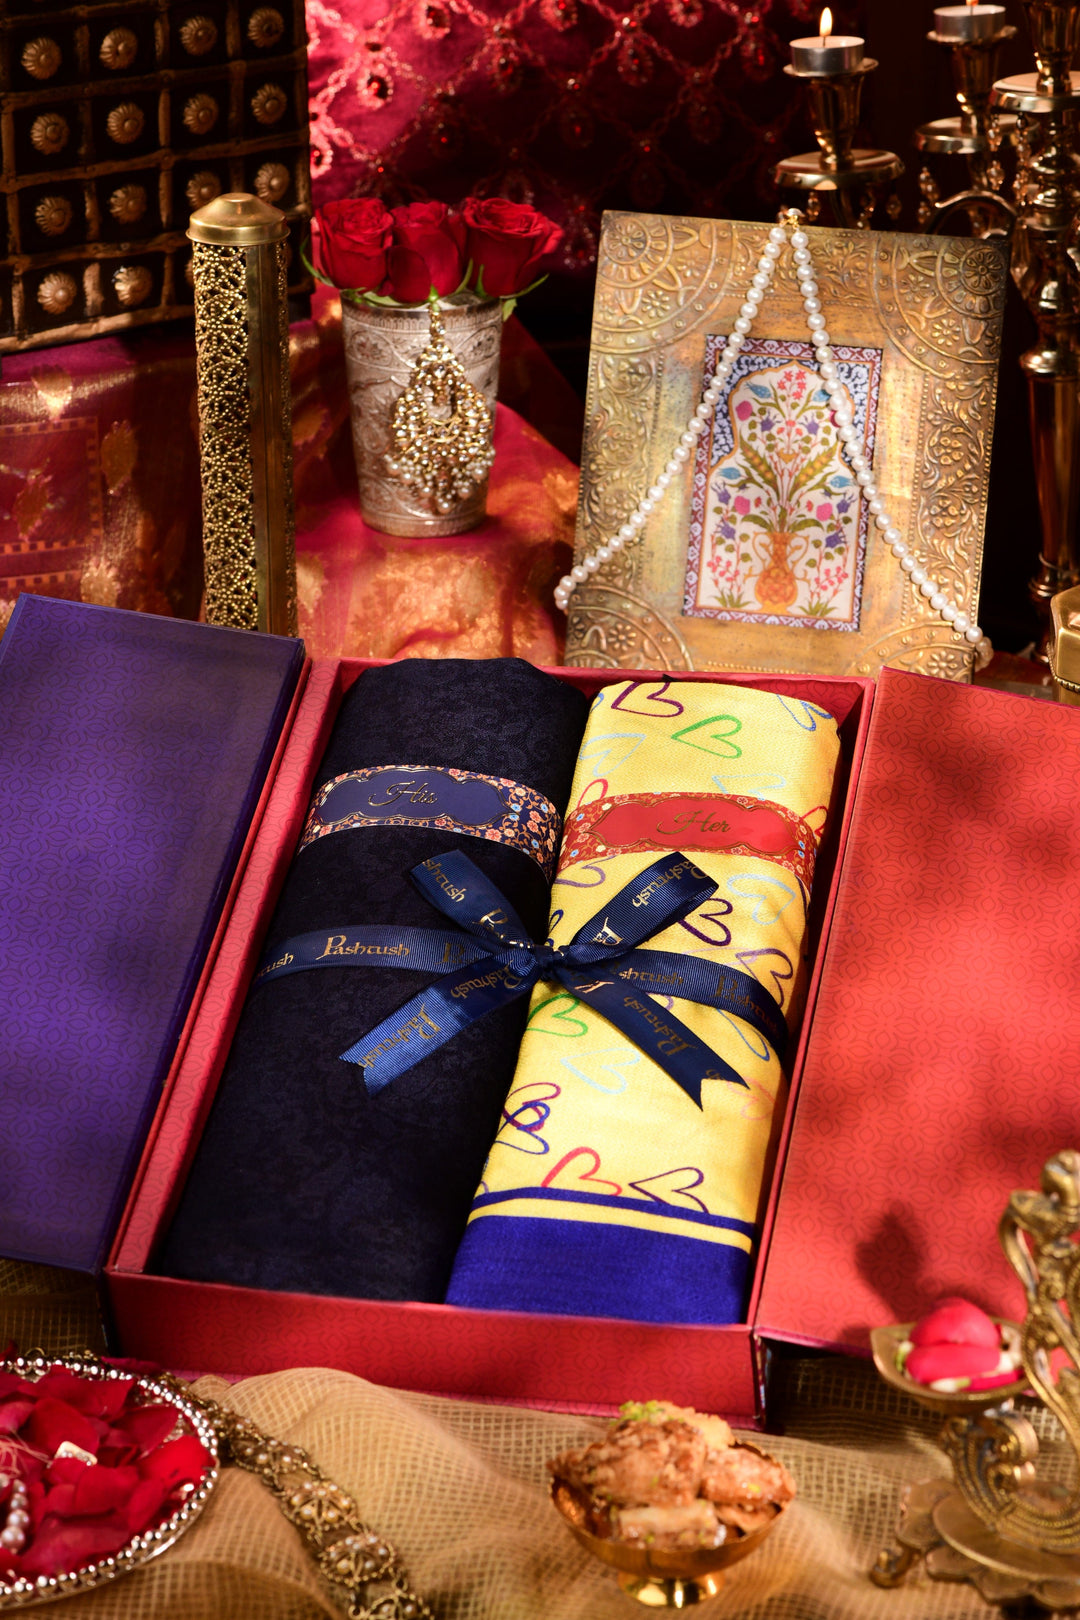 Pashtush India Gift Pack Pashtush His And Her Gift Set Of Self and Bamboo Printed Stoles With Premium Gift Box Packaging, Navy Blue and Multi color